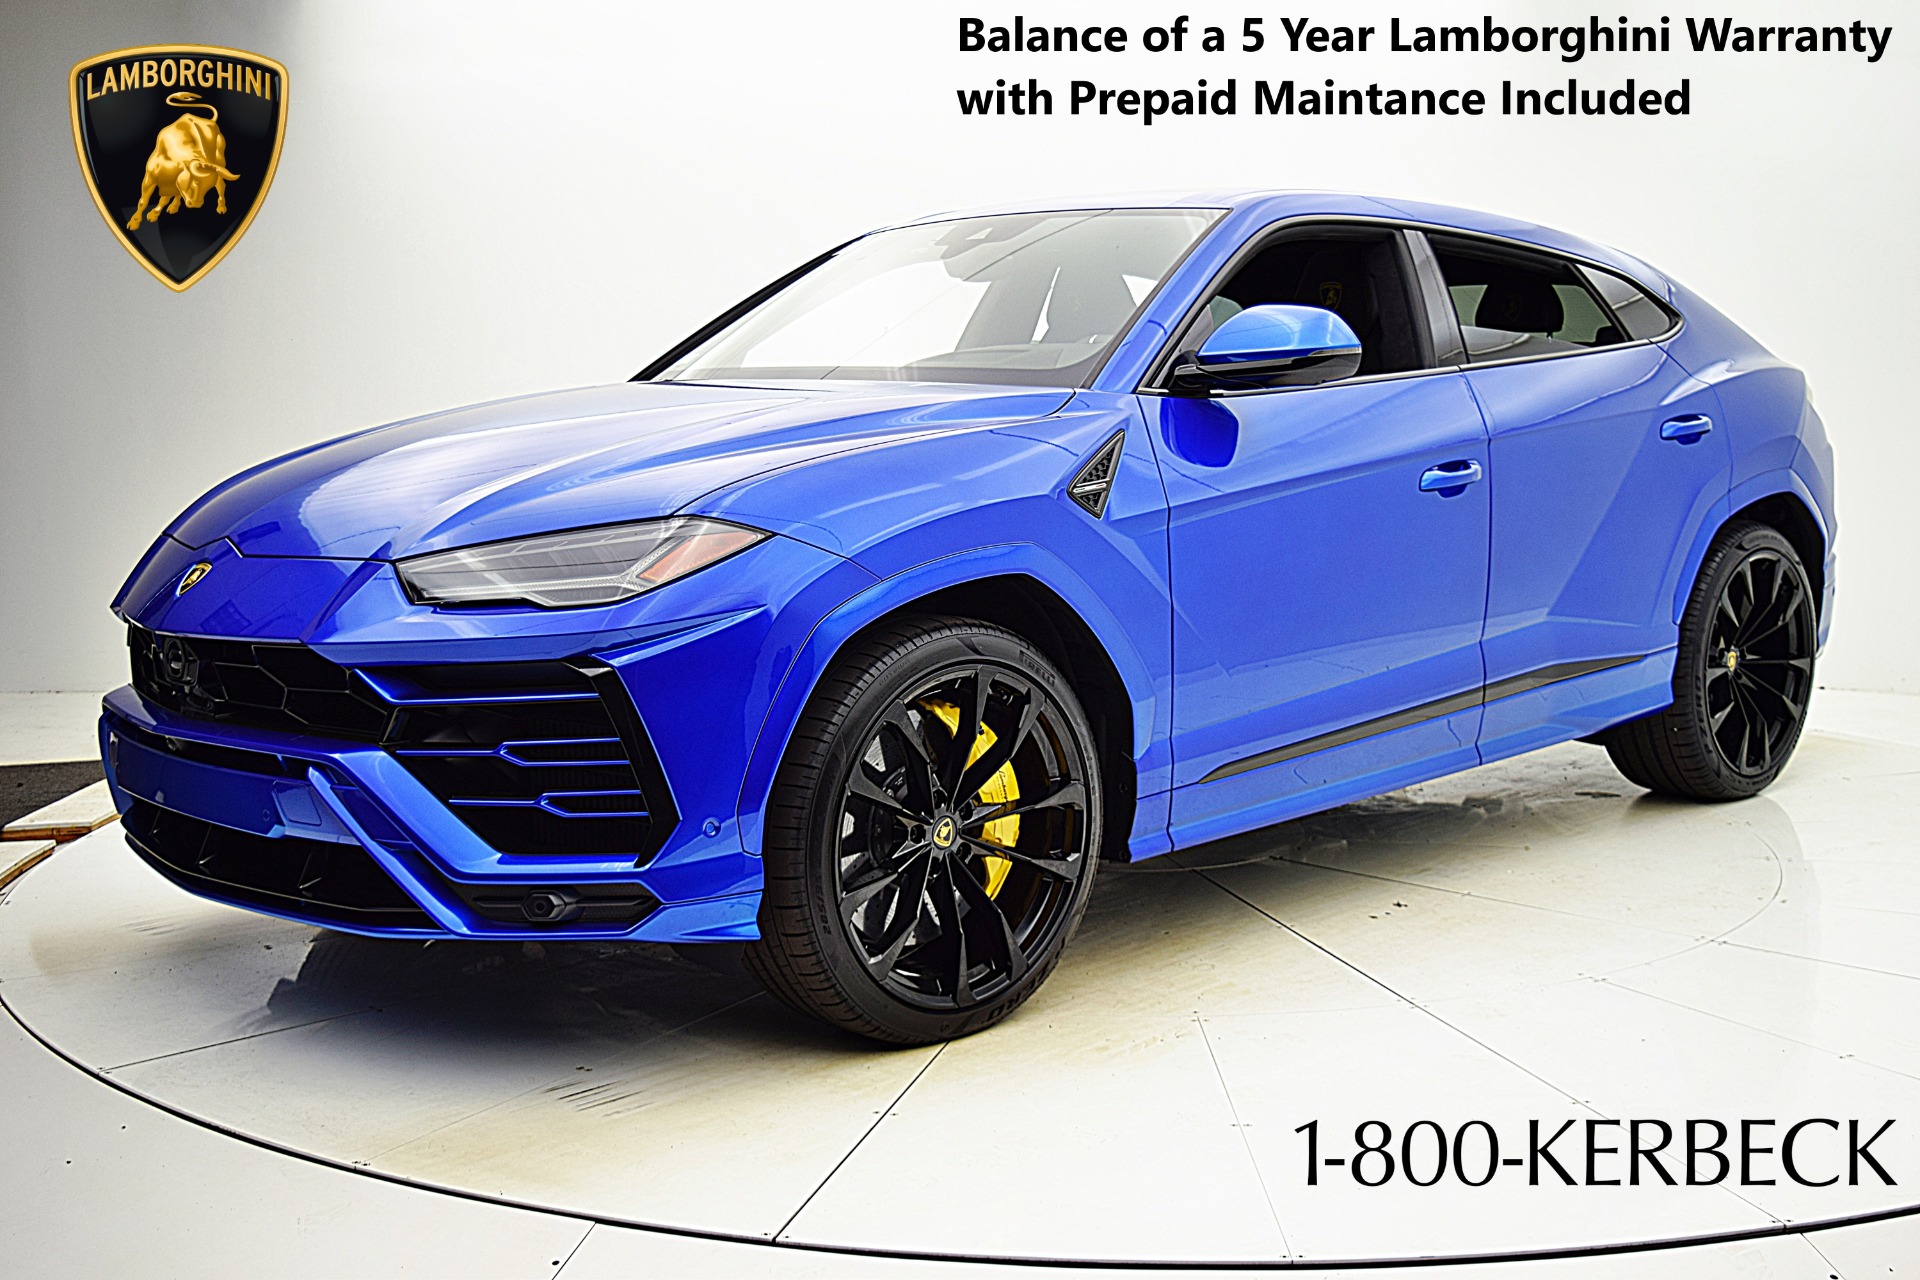 Used 2022 Lamborghini Urus / LEASE OPTIONS AVAILABLE for sale $309,000 at Bentley Palmyra N.J. in Palmyra NJ 08065 2